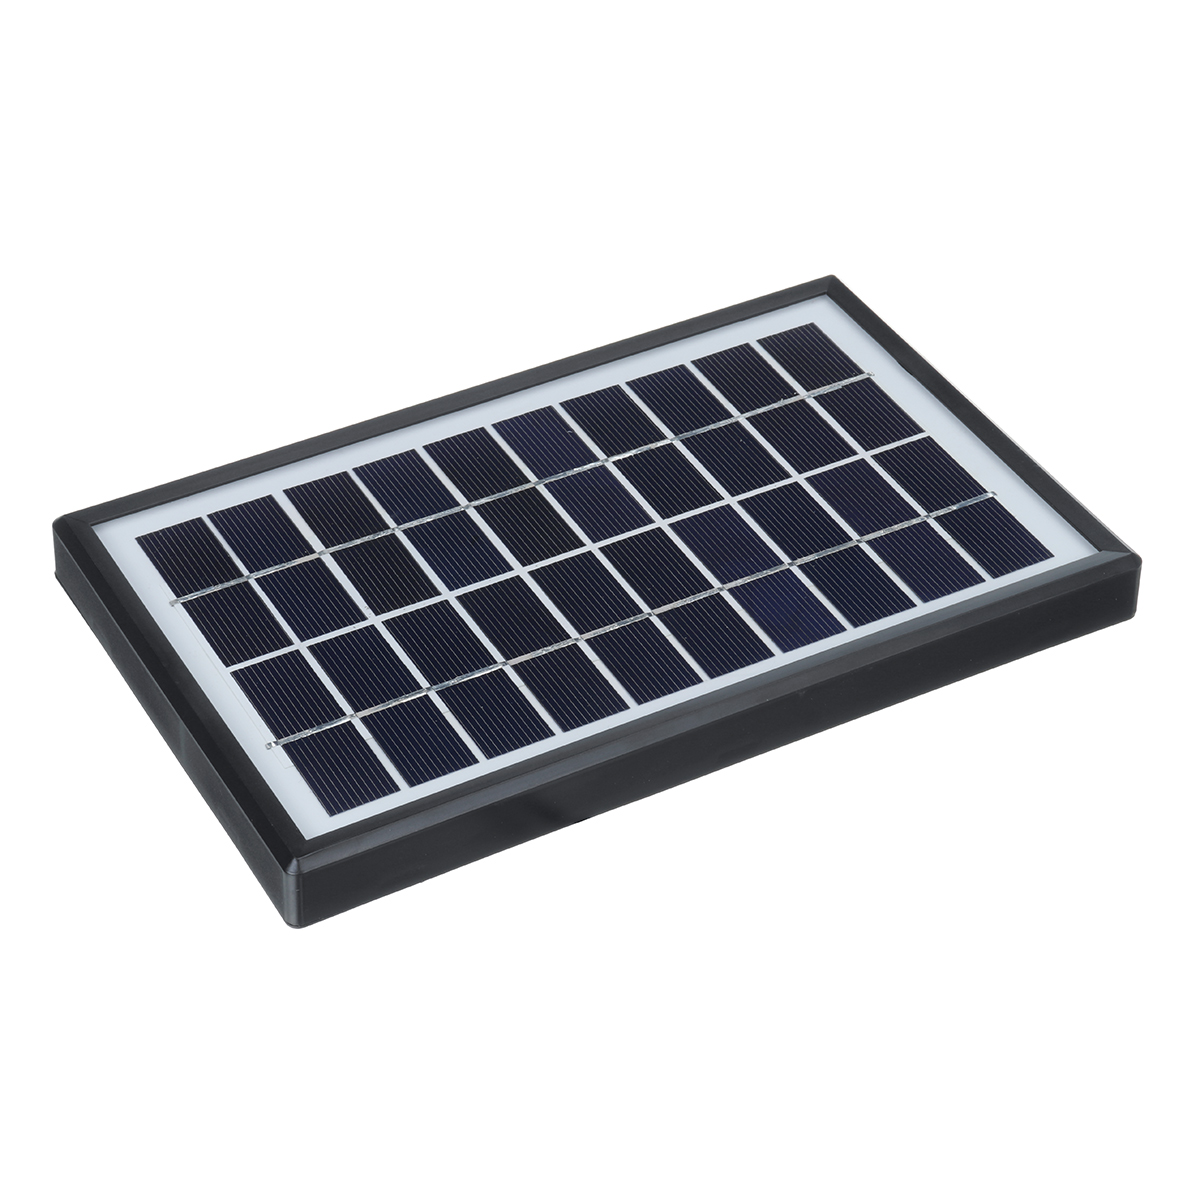 4W-10V-380LH-Solar-Panel-Water-Pump-Landscape-Pond-Pool-Aquarium-Floating-Fountain-with-6-Nozzles-1543610-9